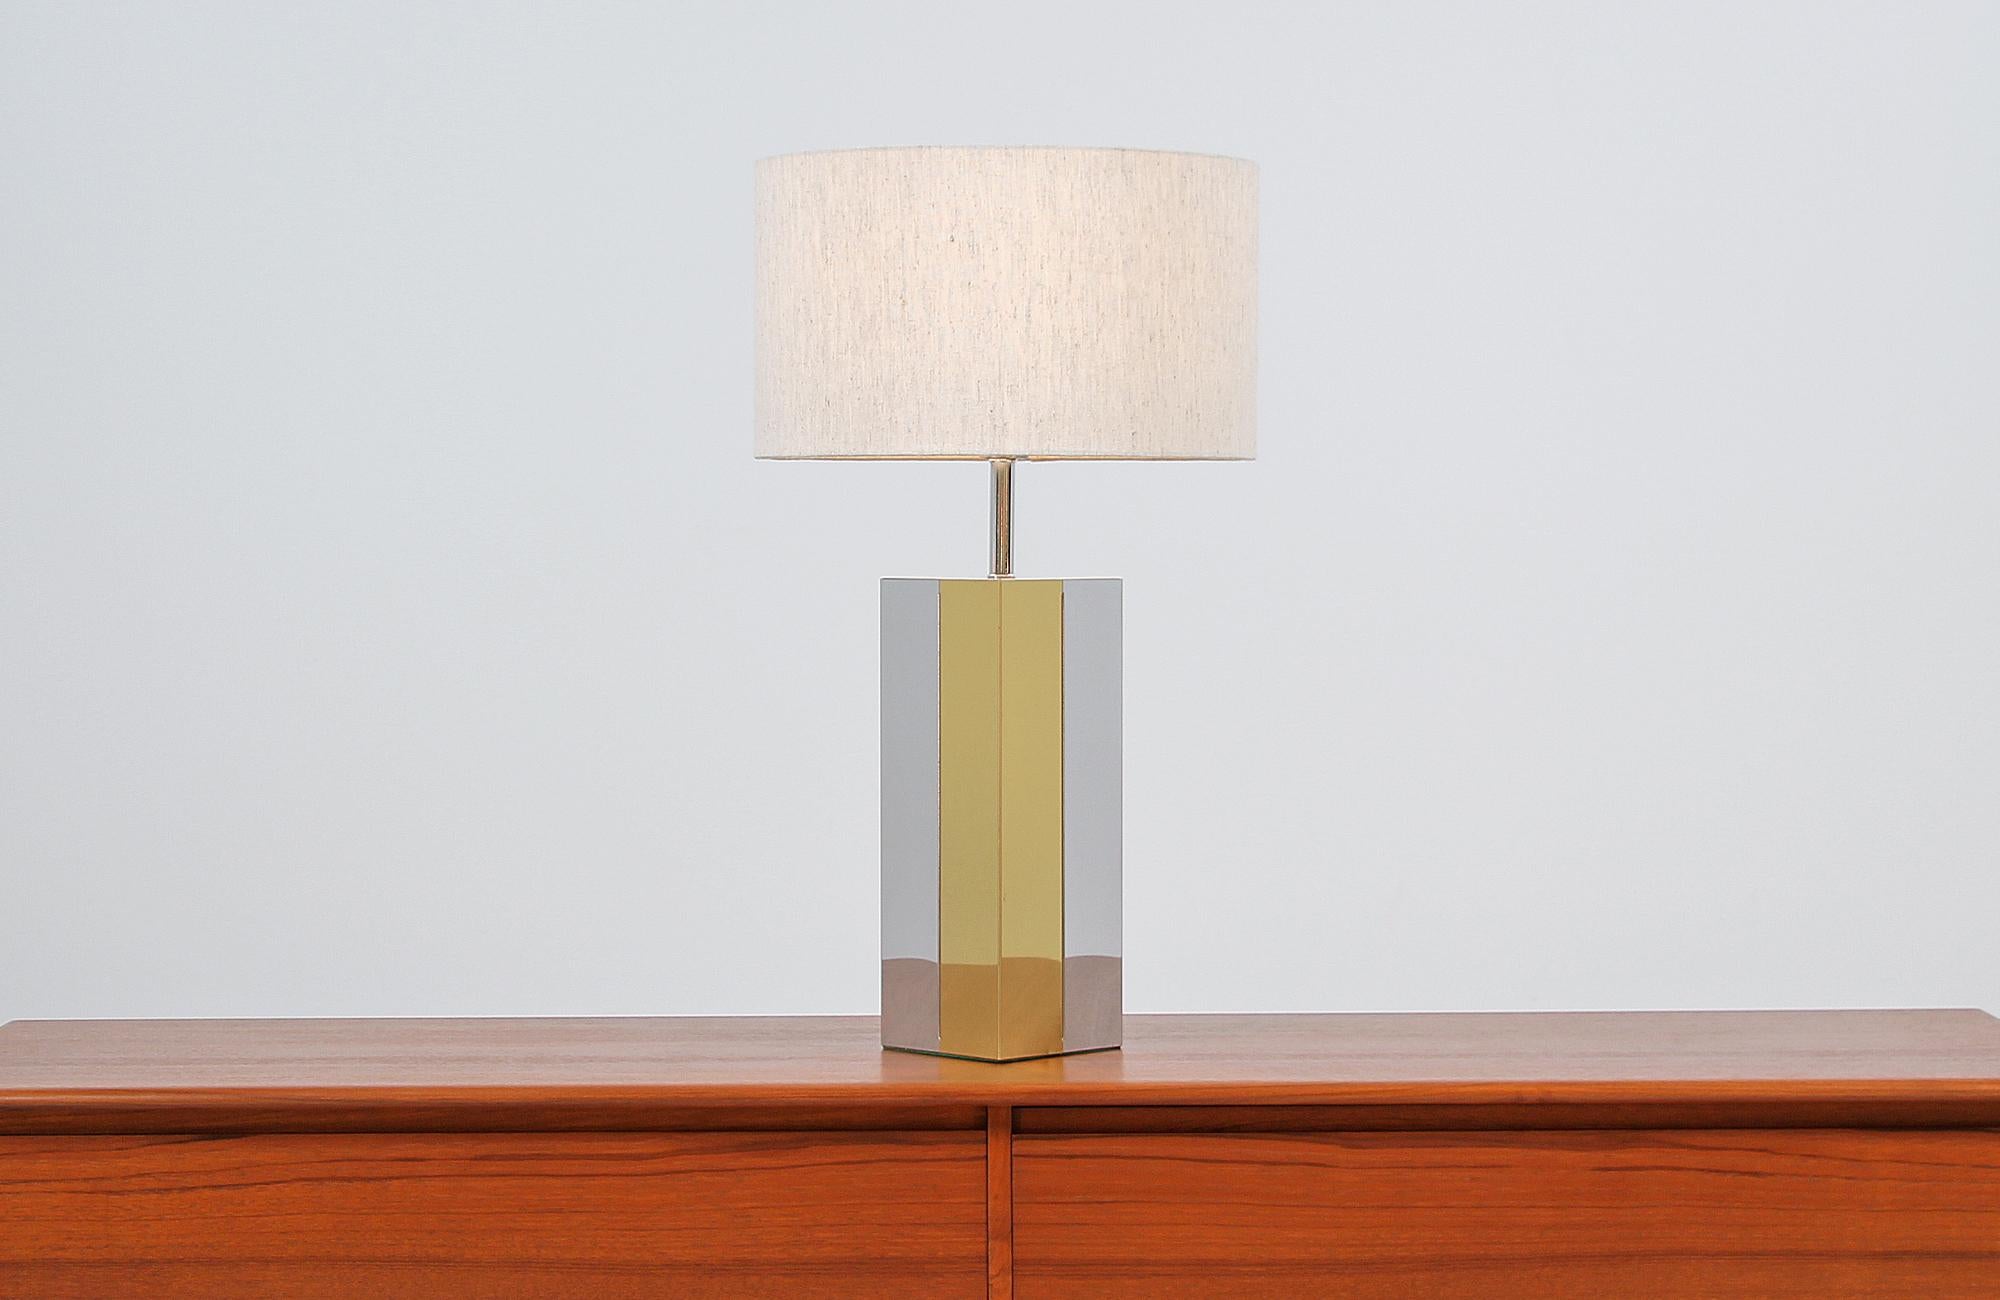 Dazzling modern table lamp designed and manufactured in the United States, circa 1960s. This unique and elegant lamp features a tall chrome and brass plated rectangular body in vertical panels on this Minimalist and geometric design. The plated